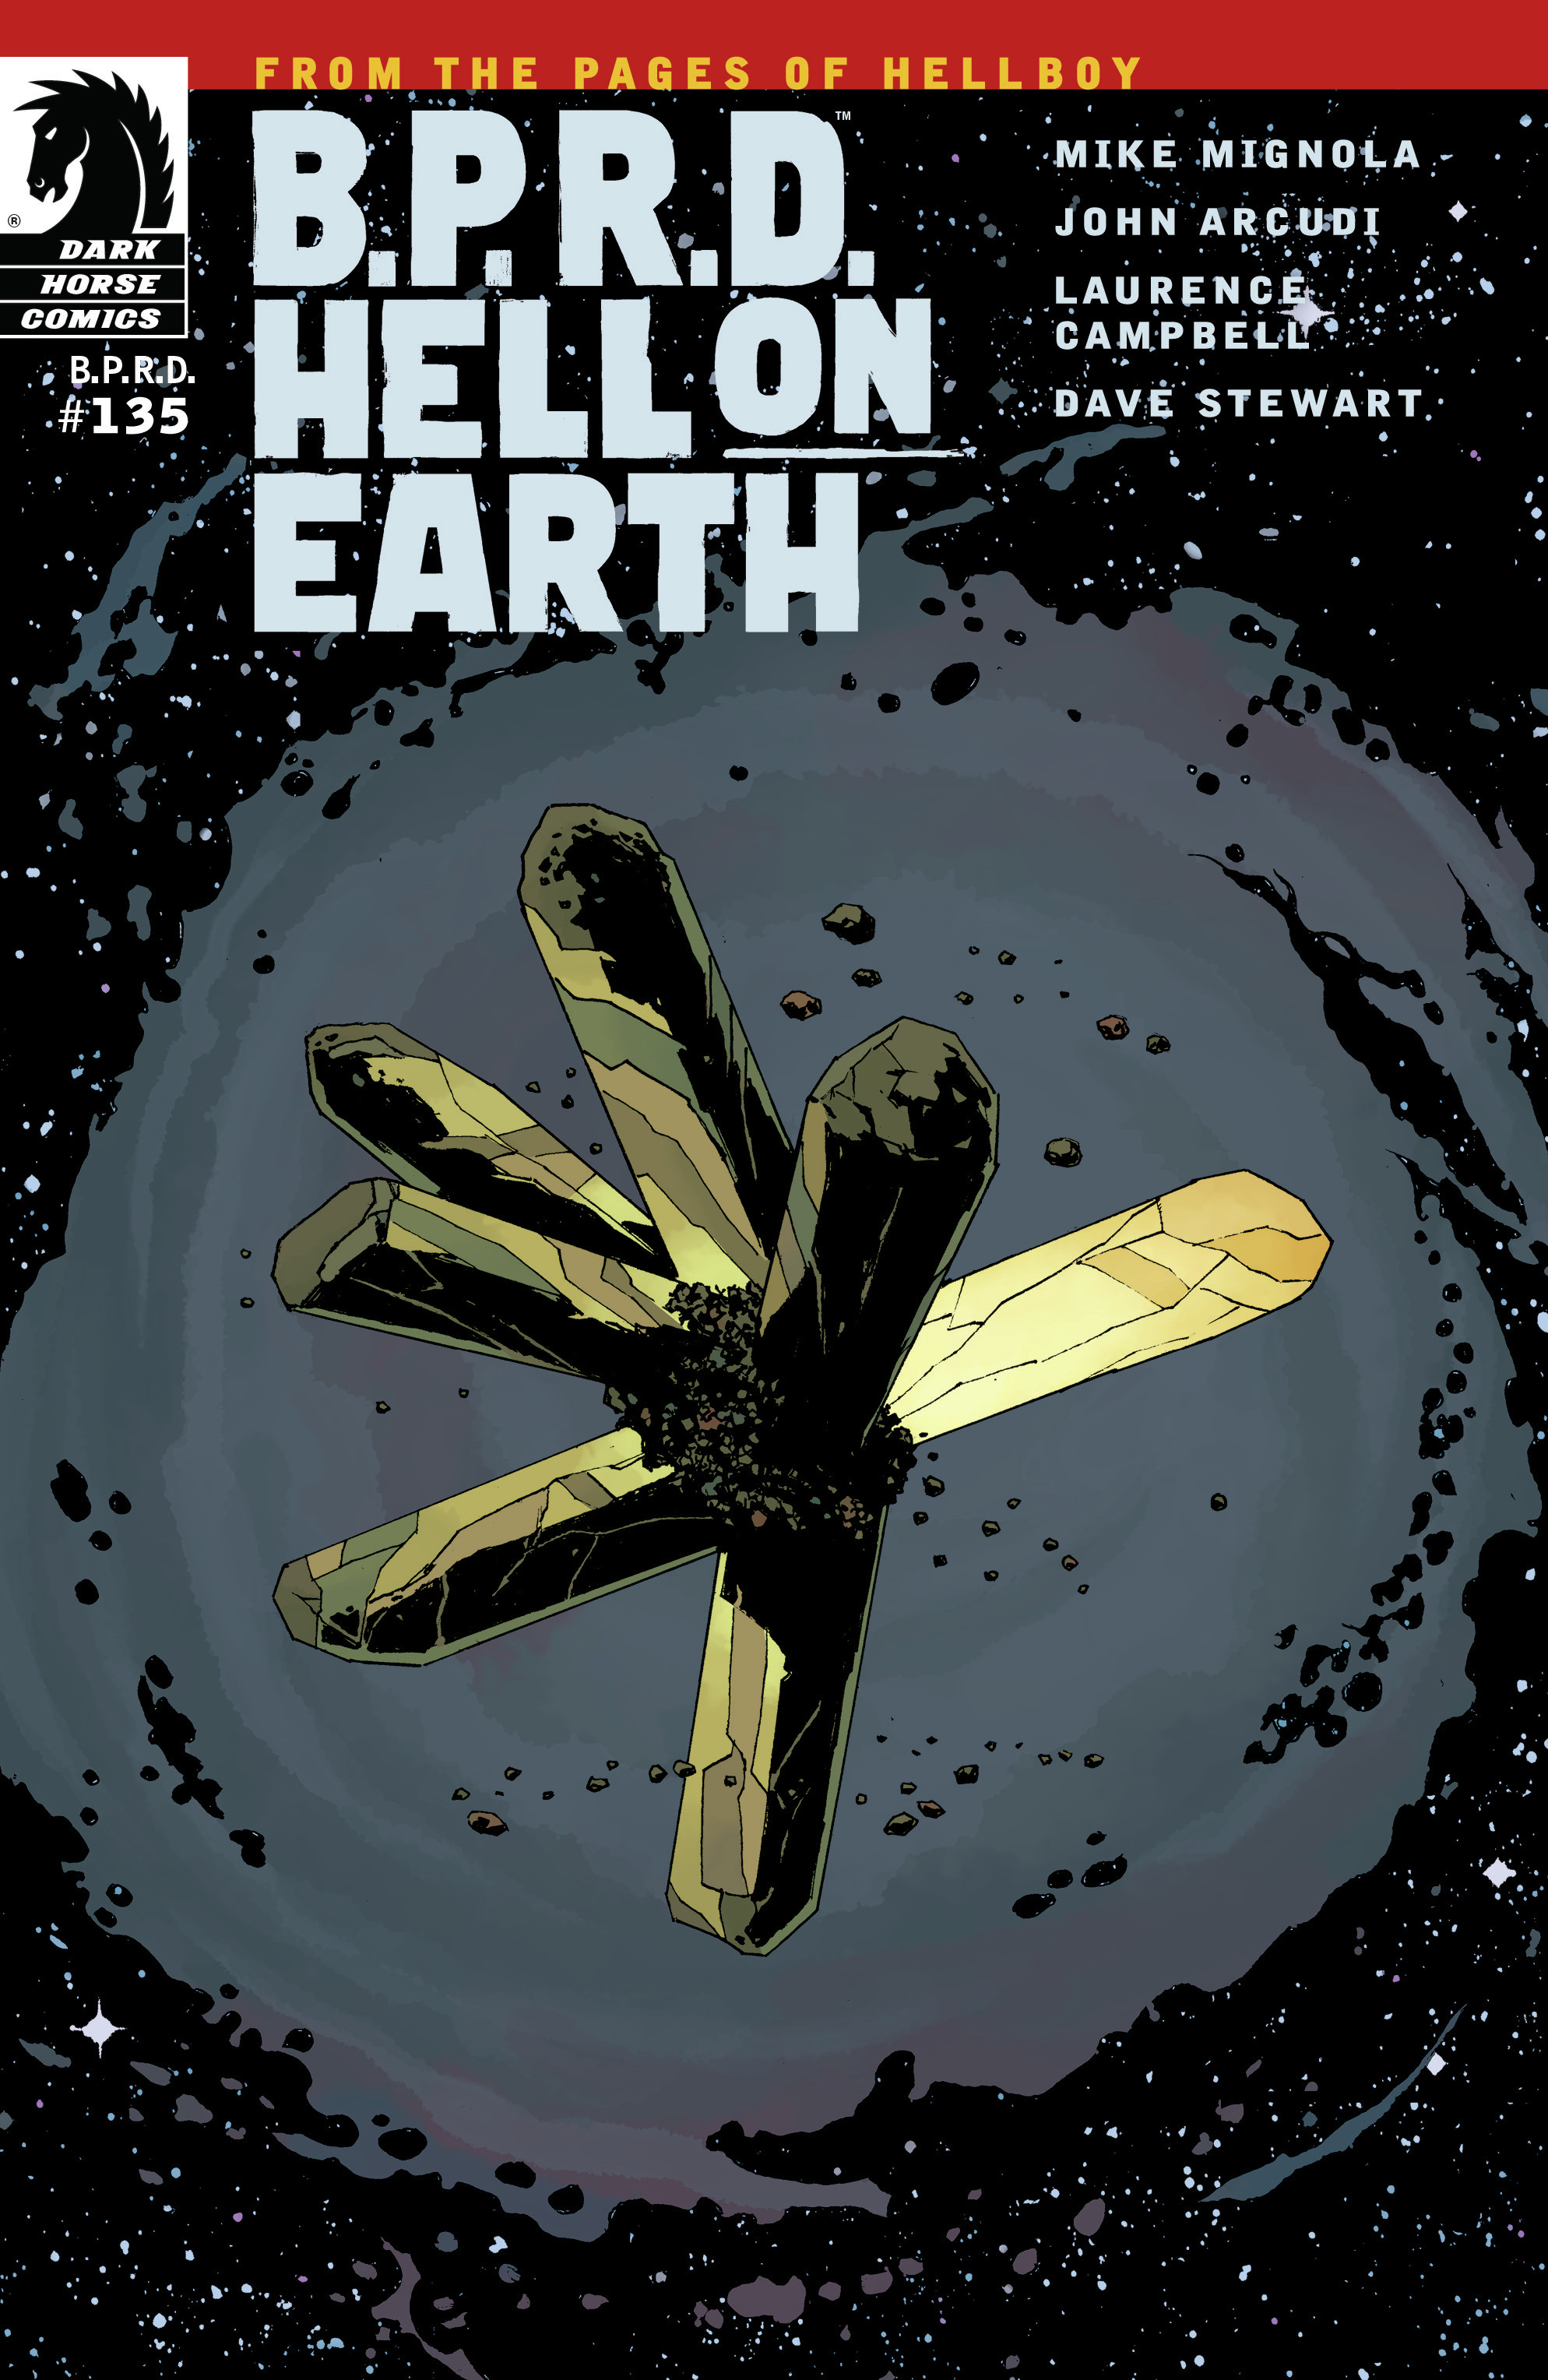 B.P.R.D. Hell On Earth #6